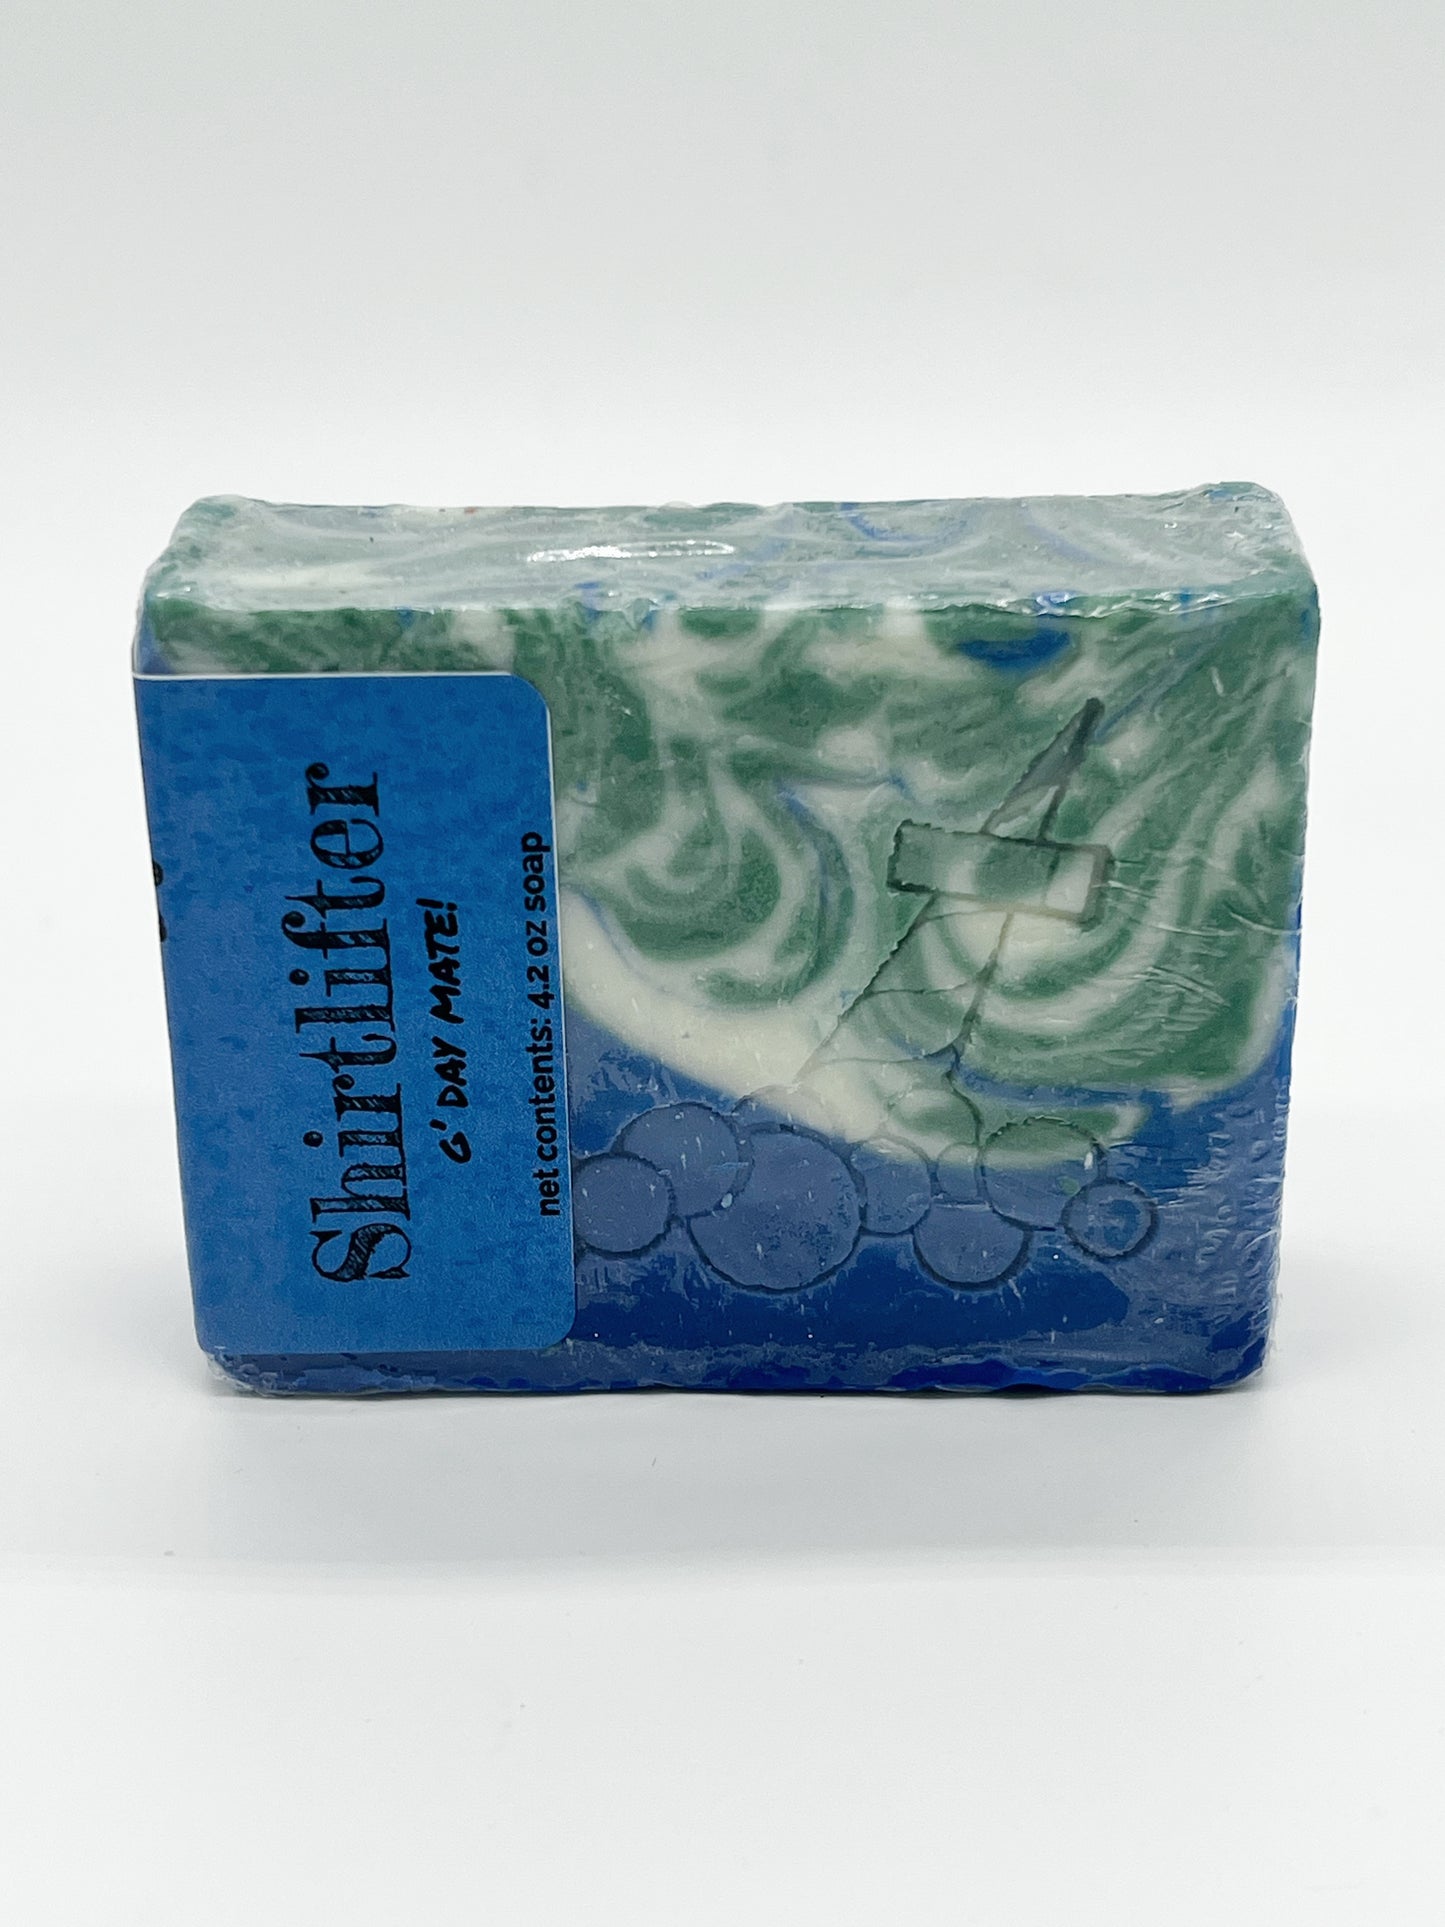 Shirtlifter (Gay Male Inclusive) Pride Soap